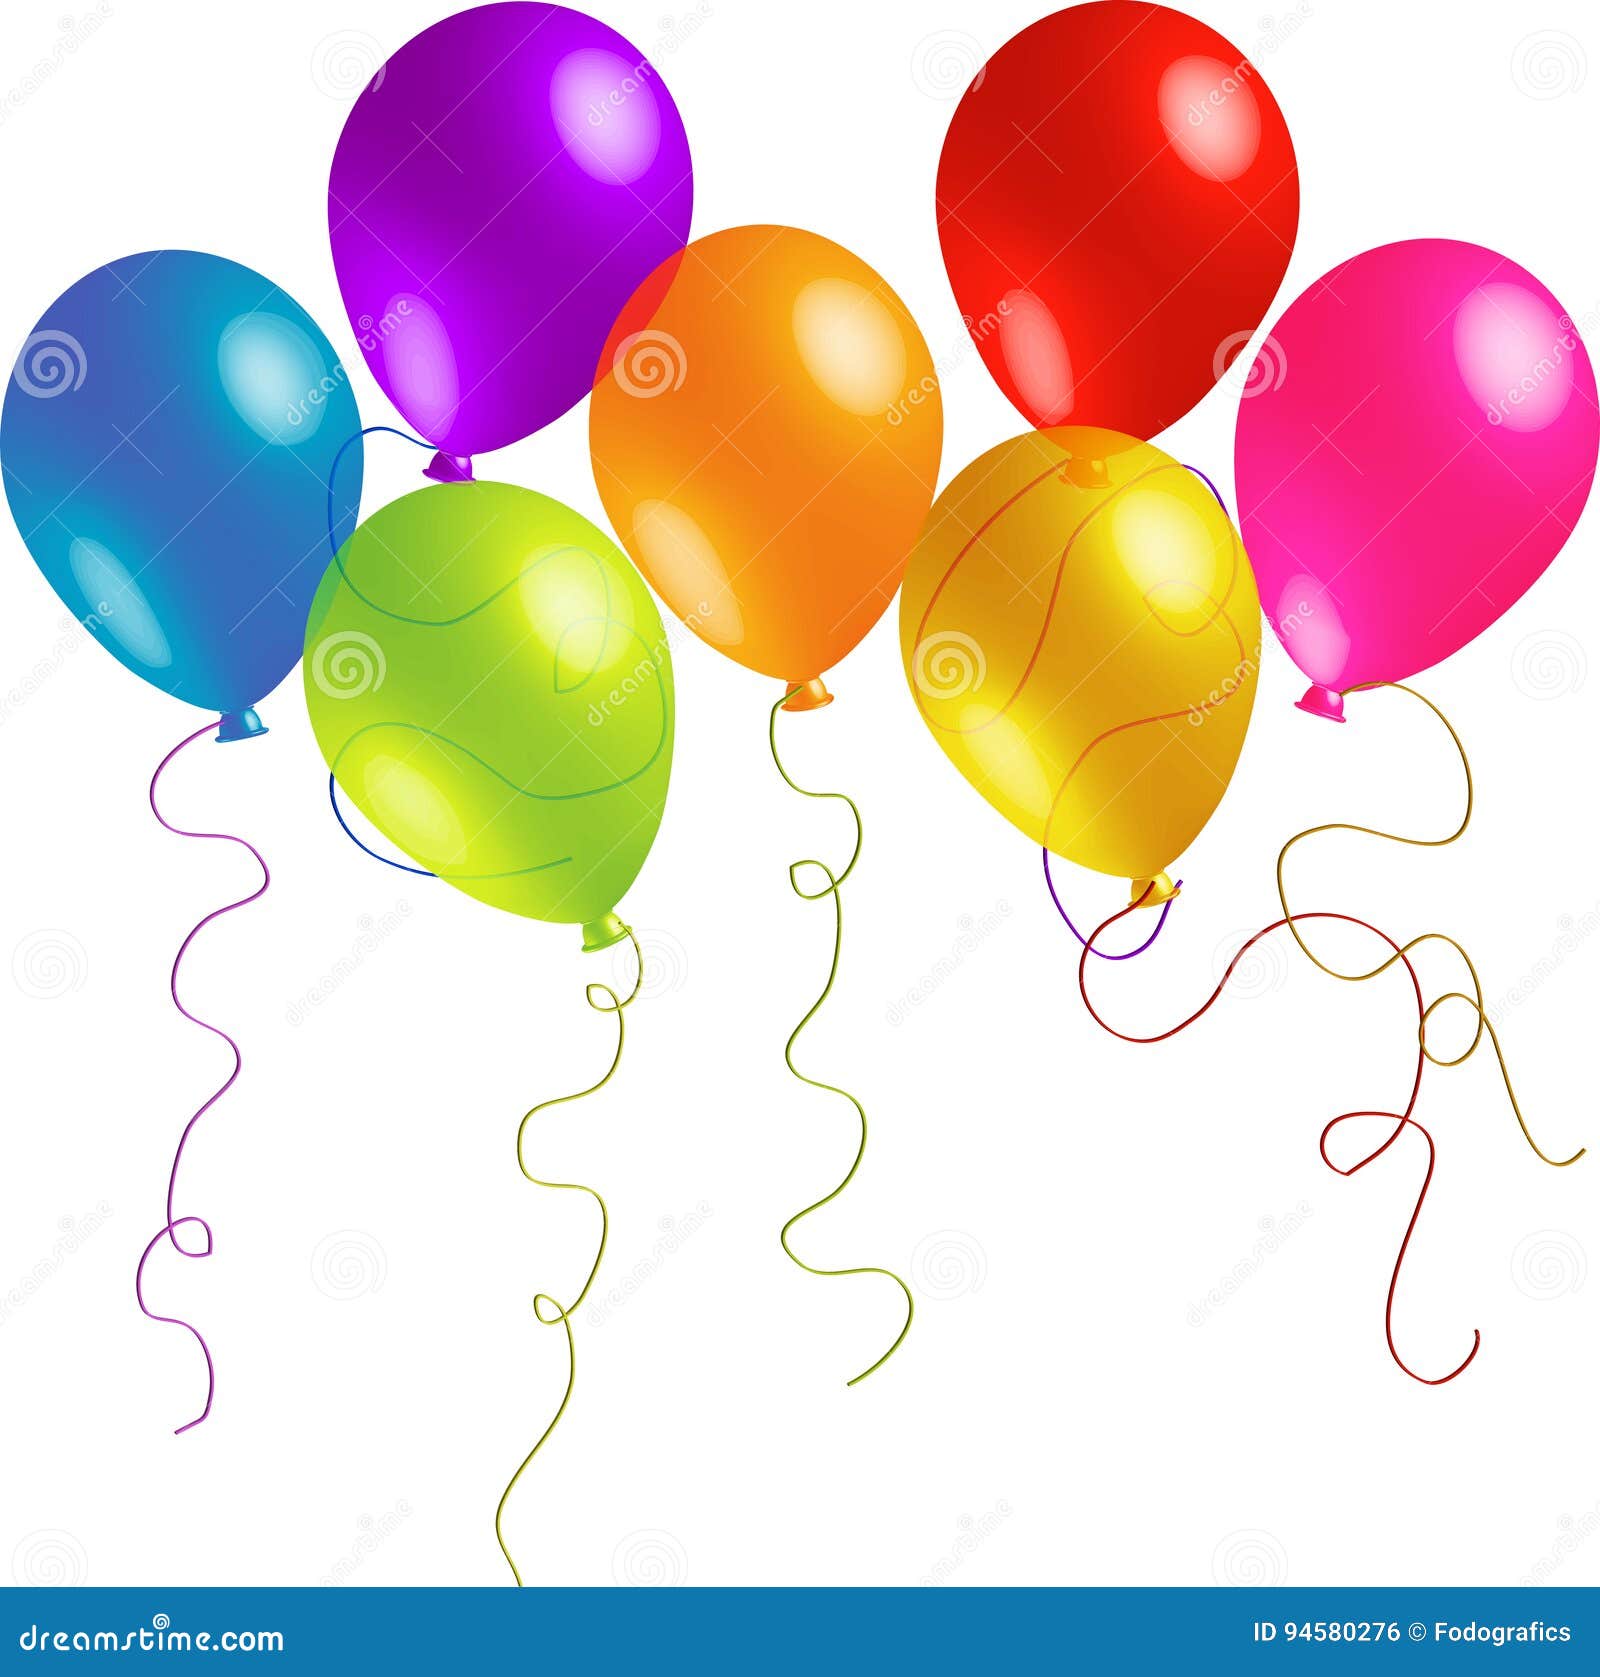 Seven Colorful Birthday Balloons Graphic by harunikaart · Creative Fabrica